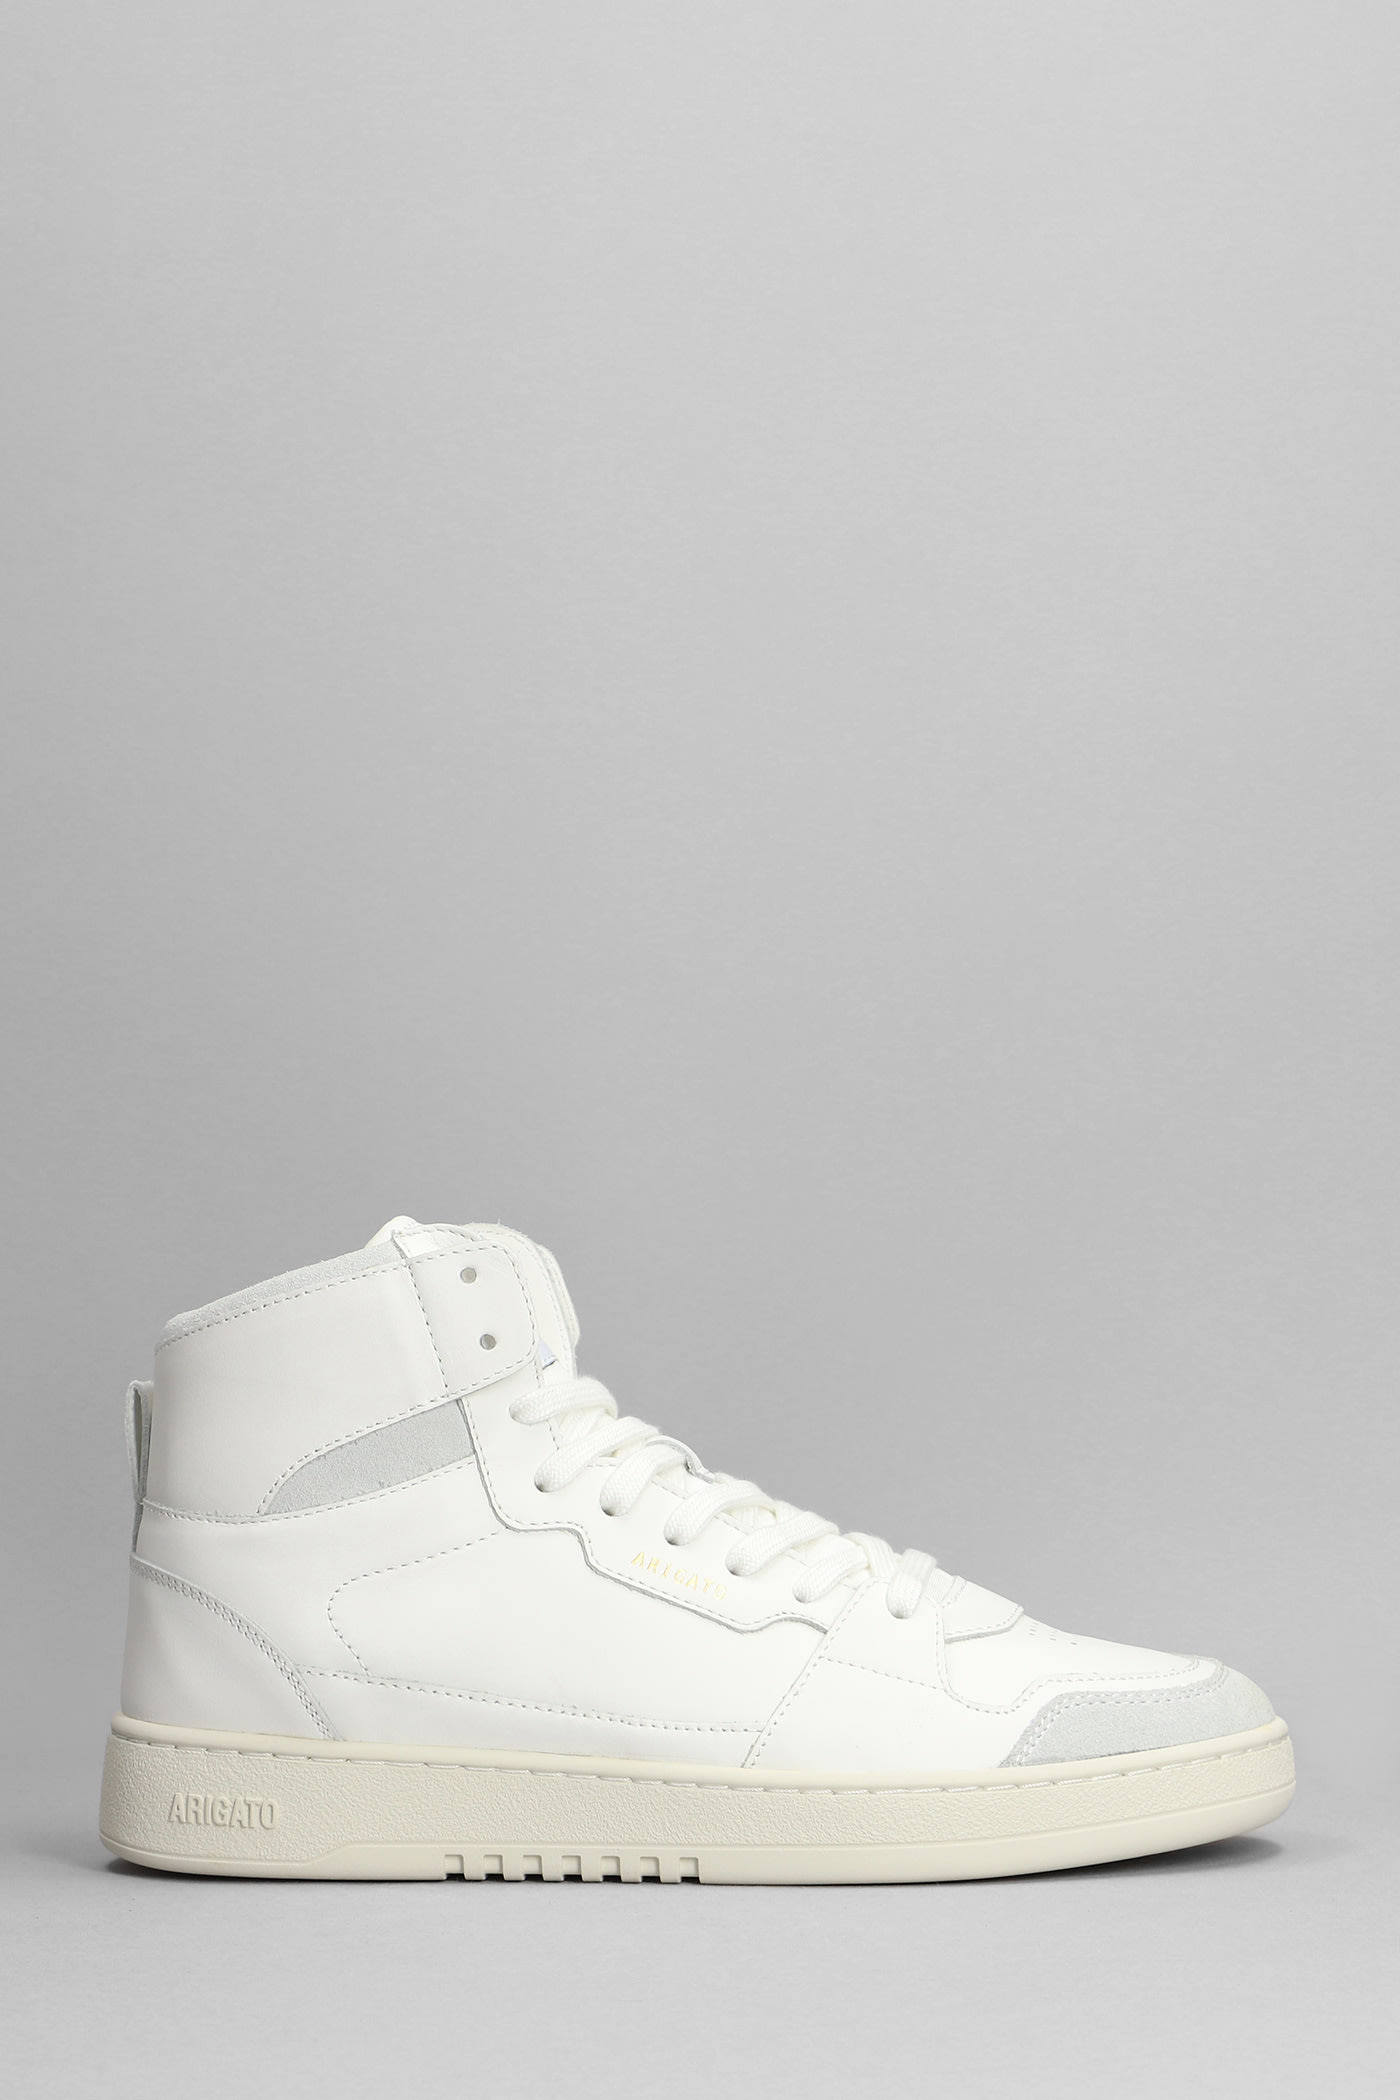 Axel Arigato Dice Hi Sneakers In White Leather